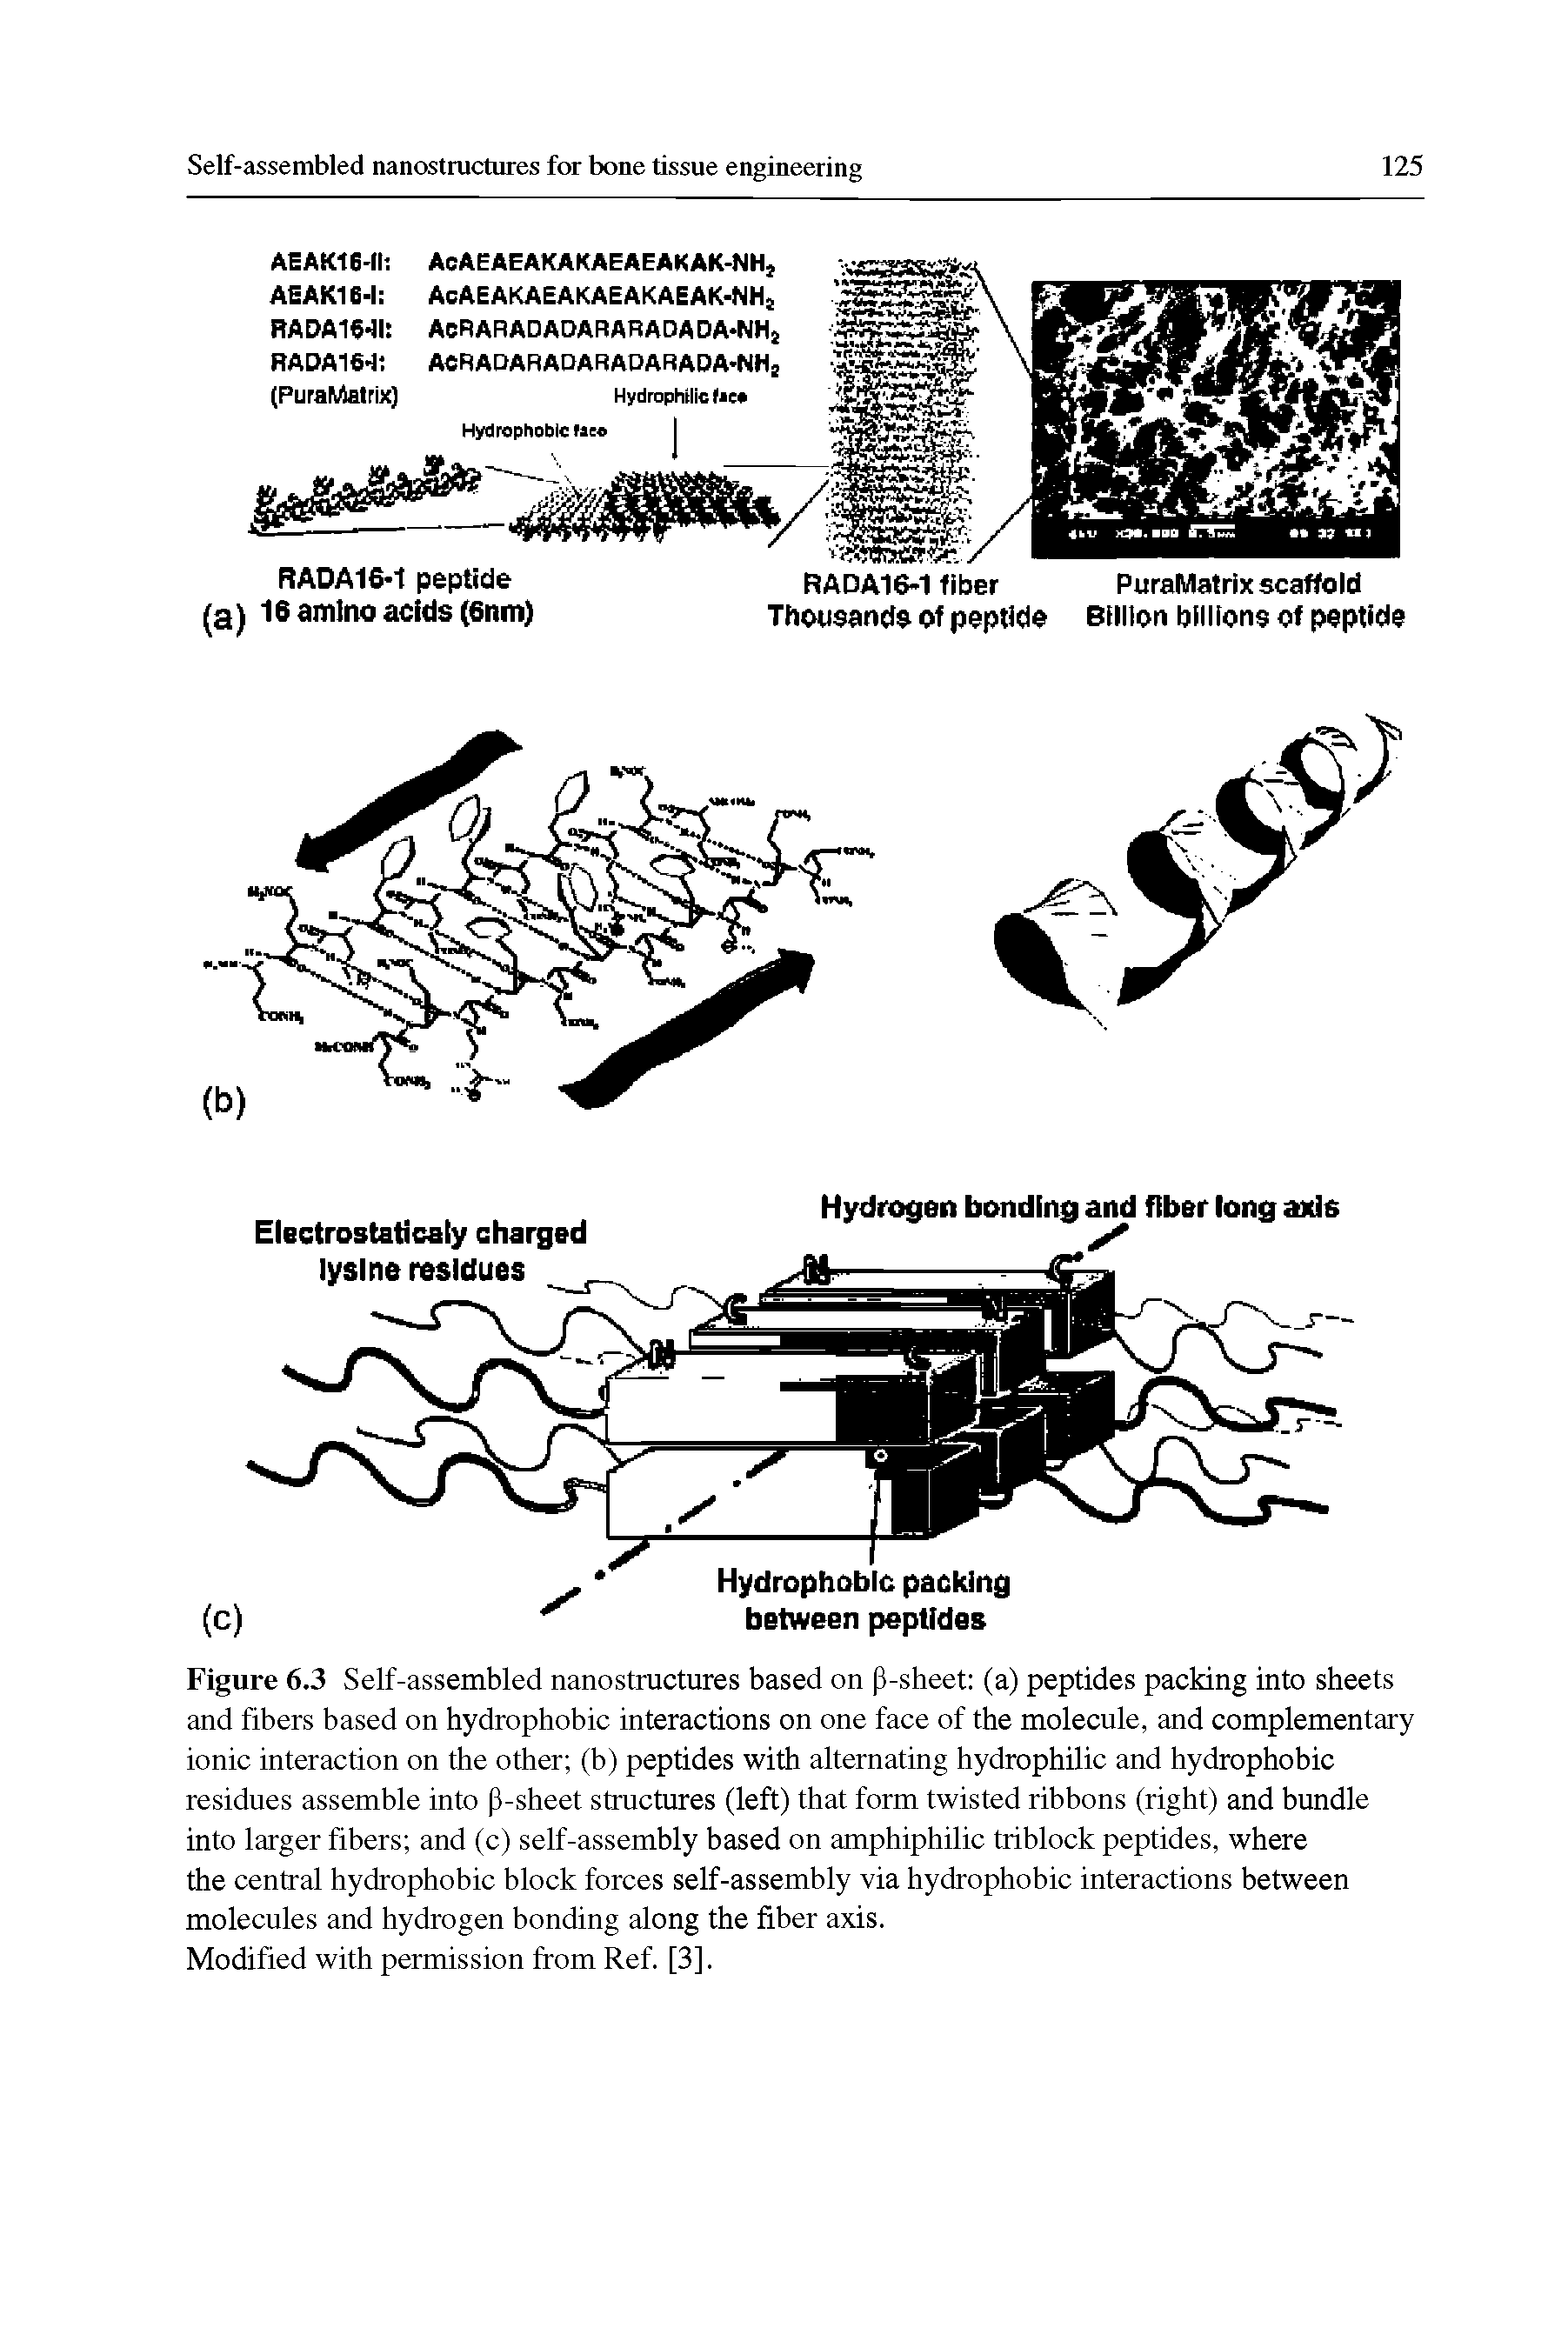 Figure 6.3 Self-assembled nanostructures based on P-sheet (a) peptides packing into sheets and fibers based on hydrophobic interactions on one face of the molecule, and complementary ionic interaction on the other (b) peptides with alternating hydrophilic and hydrophobic residues assemble into P-sheet structures (left) that form twisted ribbons (right) and bundle into larger fibers and (c) self-assembly based on amphiphilic triblock peptides, where the central hydrophobic block forces self-assembly via hydrophobic interactions between molecules and hydrogen bonding along the fiber axis.